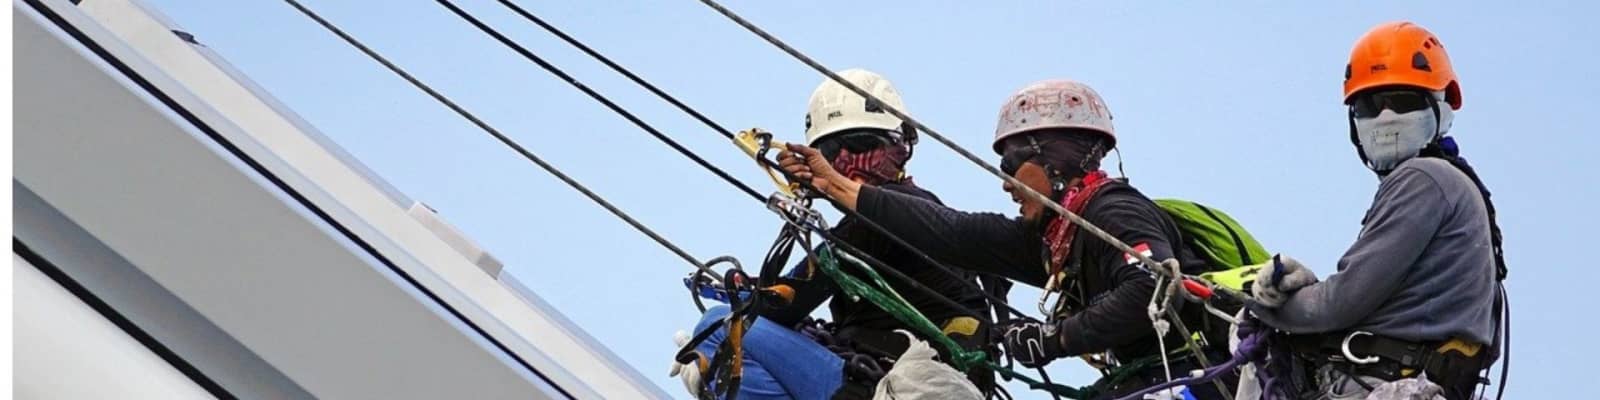 rope access pros